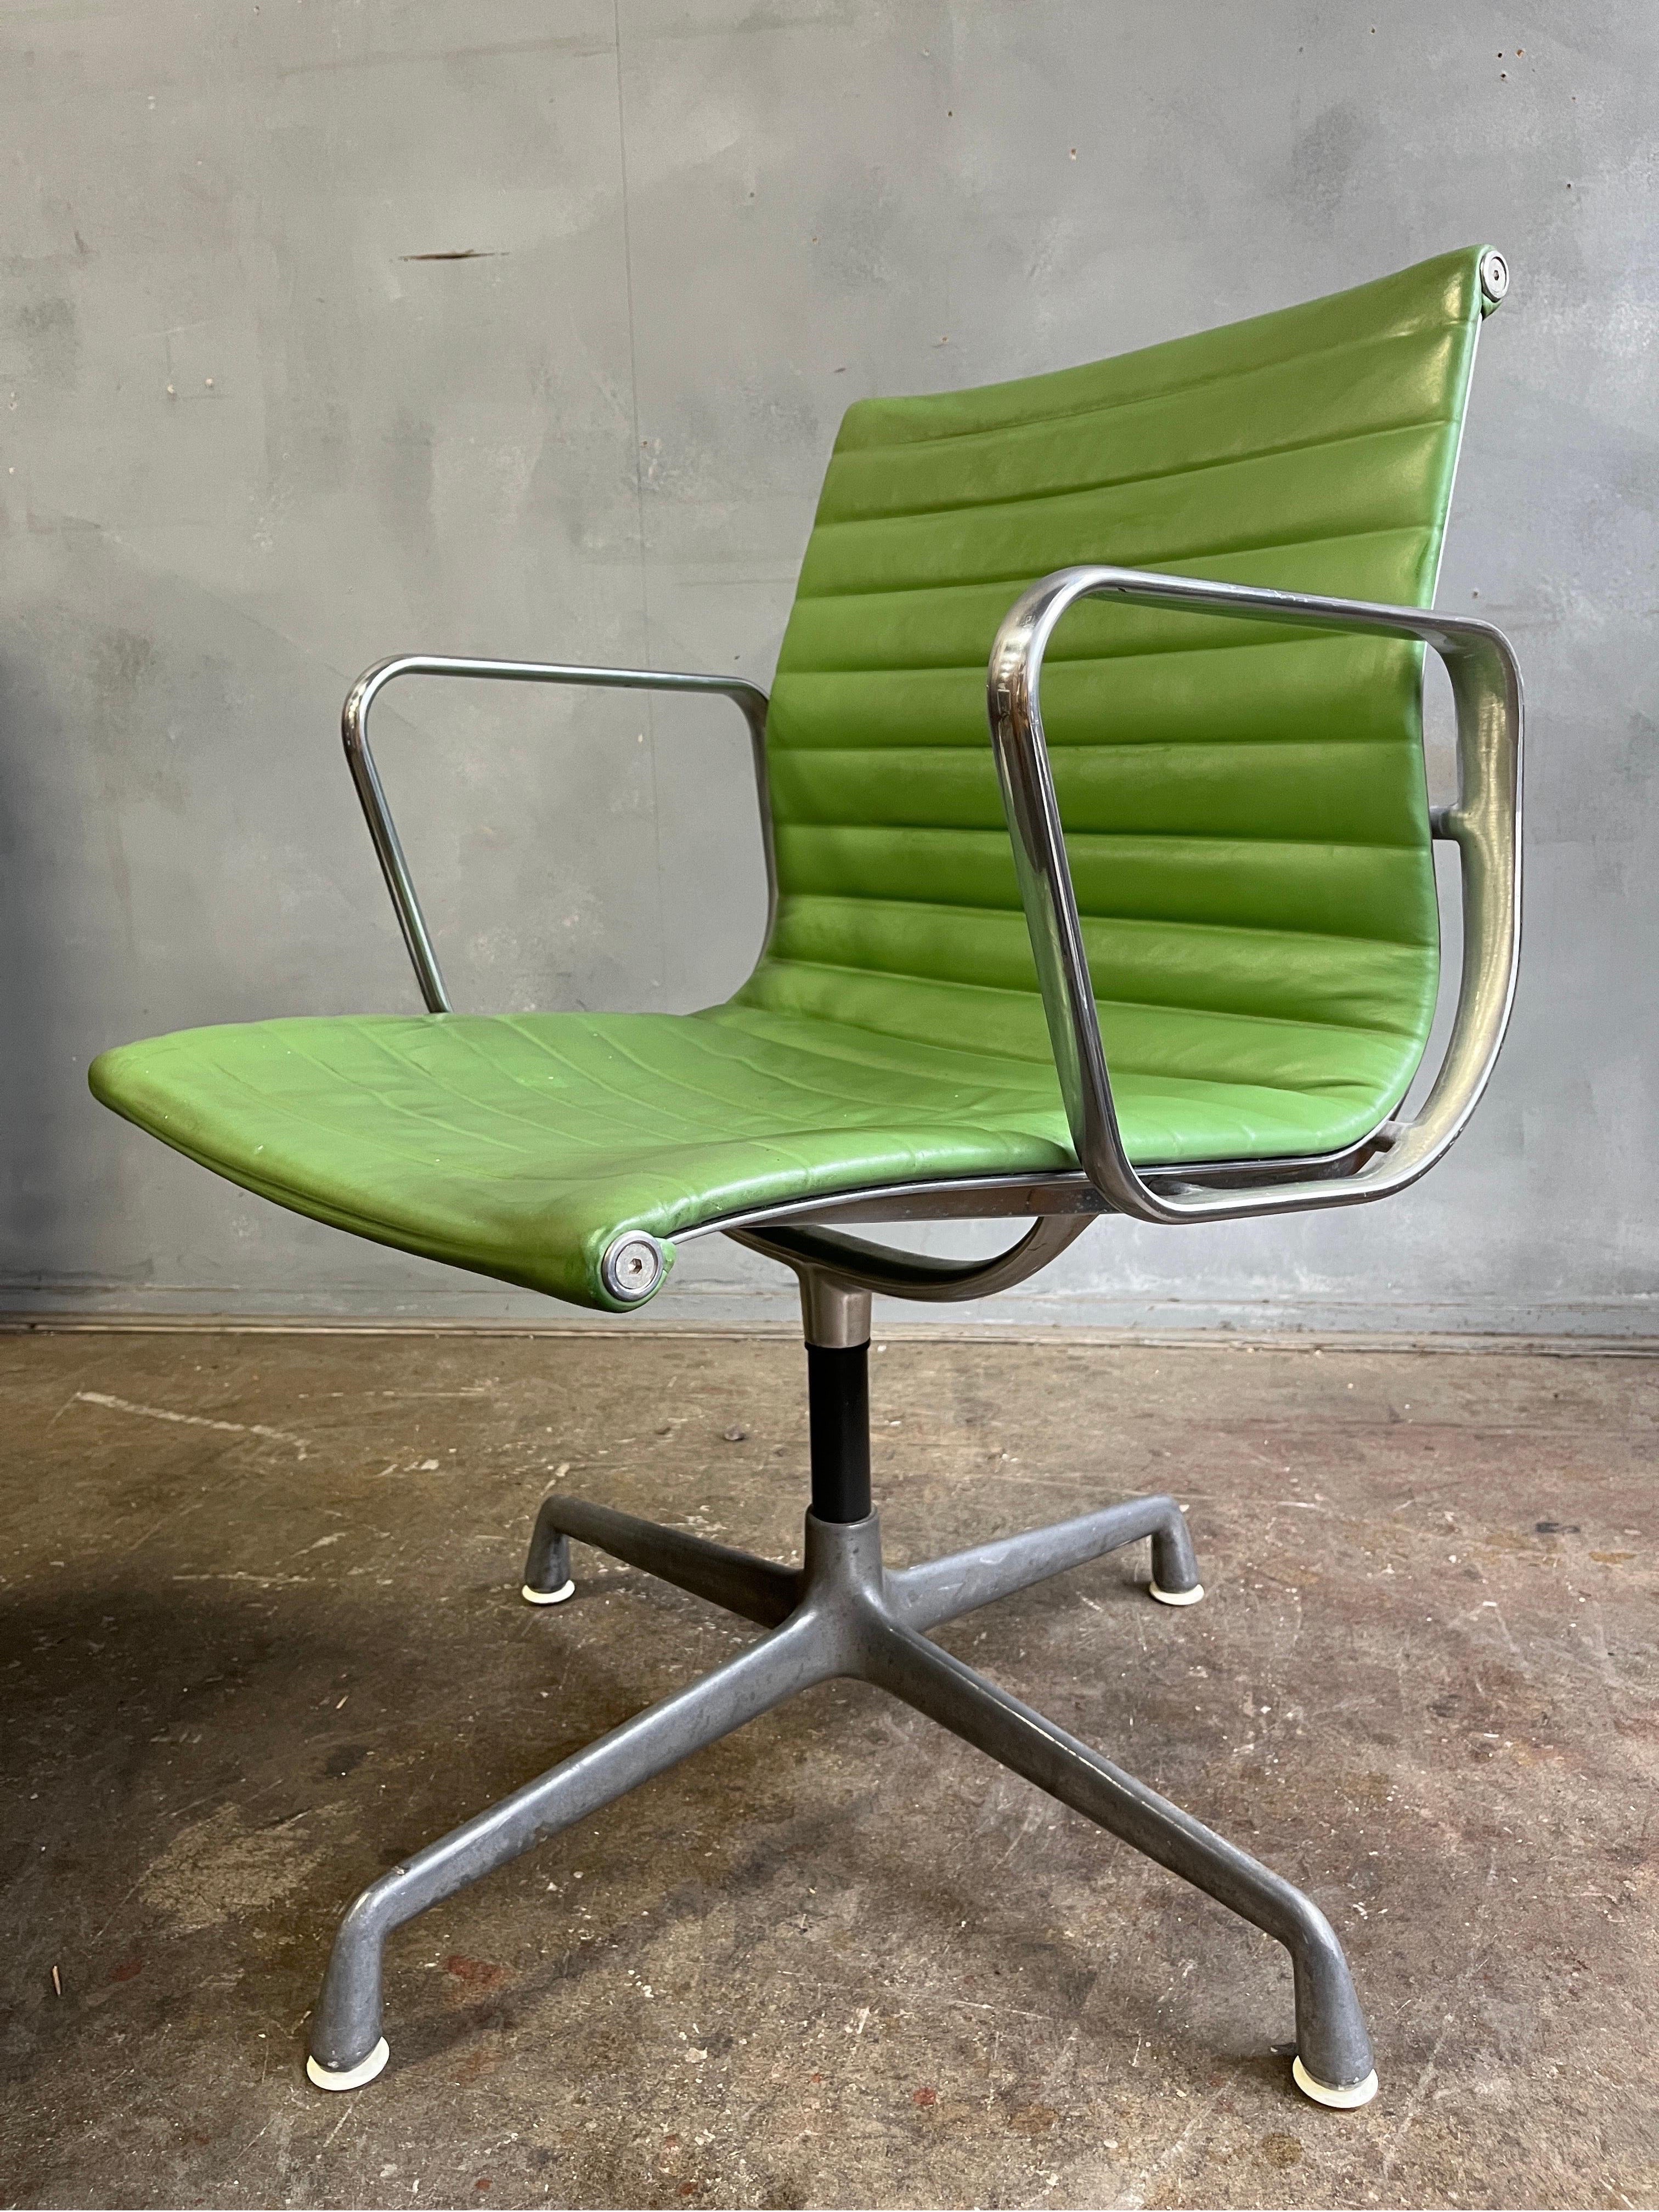 Eames side chair- EA330. Elegance and comfort separates this iconic chair from the rest. First produced in 1958 and still in production makes this one of the most sought after and timeless designs. Rare green leather. 

Ask for custom shipping quote.